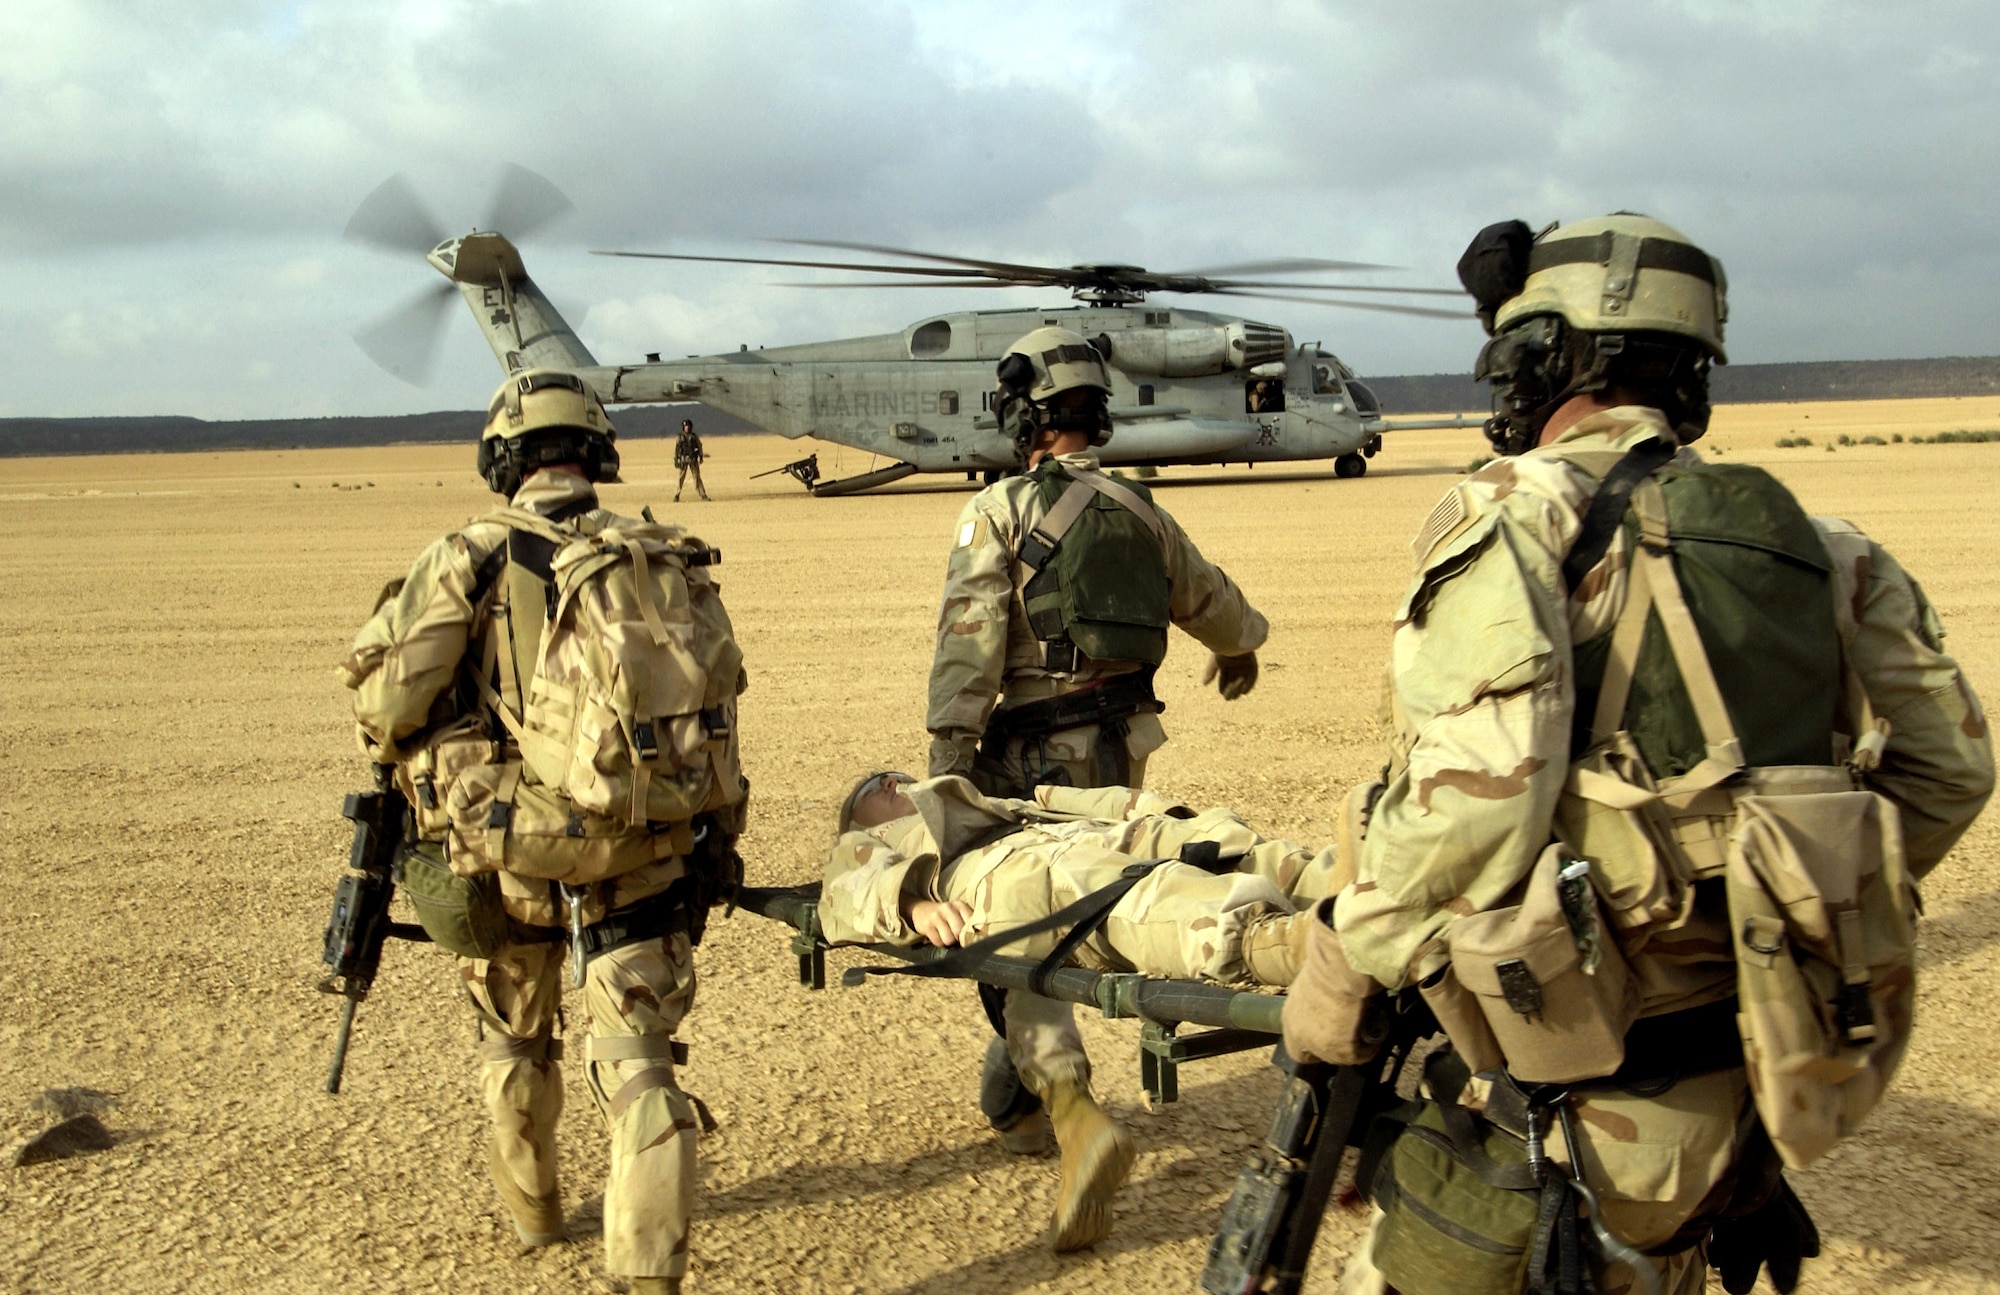 A simulated injured Airman is carried by Air Force pararescuemen toward a Marine CH-53 Super Stallion helicopter during a search and rescue exercise Wednesday, Feb. 8, 2006, at Camp Lemonier, Djibouti, Africa. Administrative control for select active-duty Air Force combat search and rescue assets is transferring from Air Force Special Operations Command to Air Combat Command, the Air Force announced Feb. 27. (U.S. Air Force photo/Staff Sgt. Ricky A. Bloom)